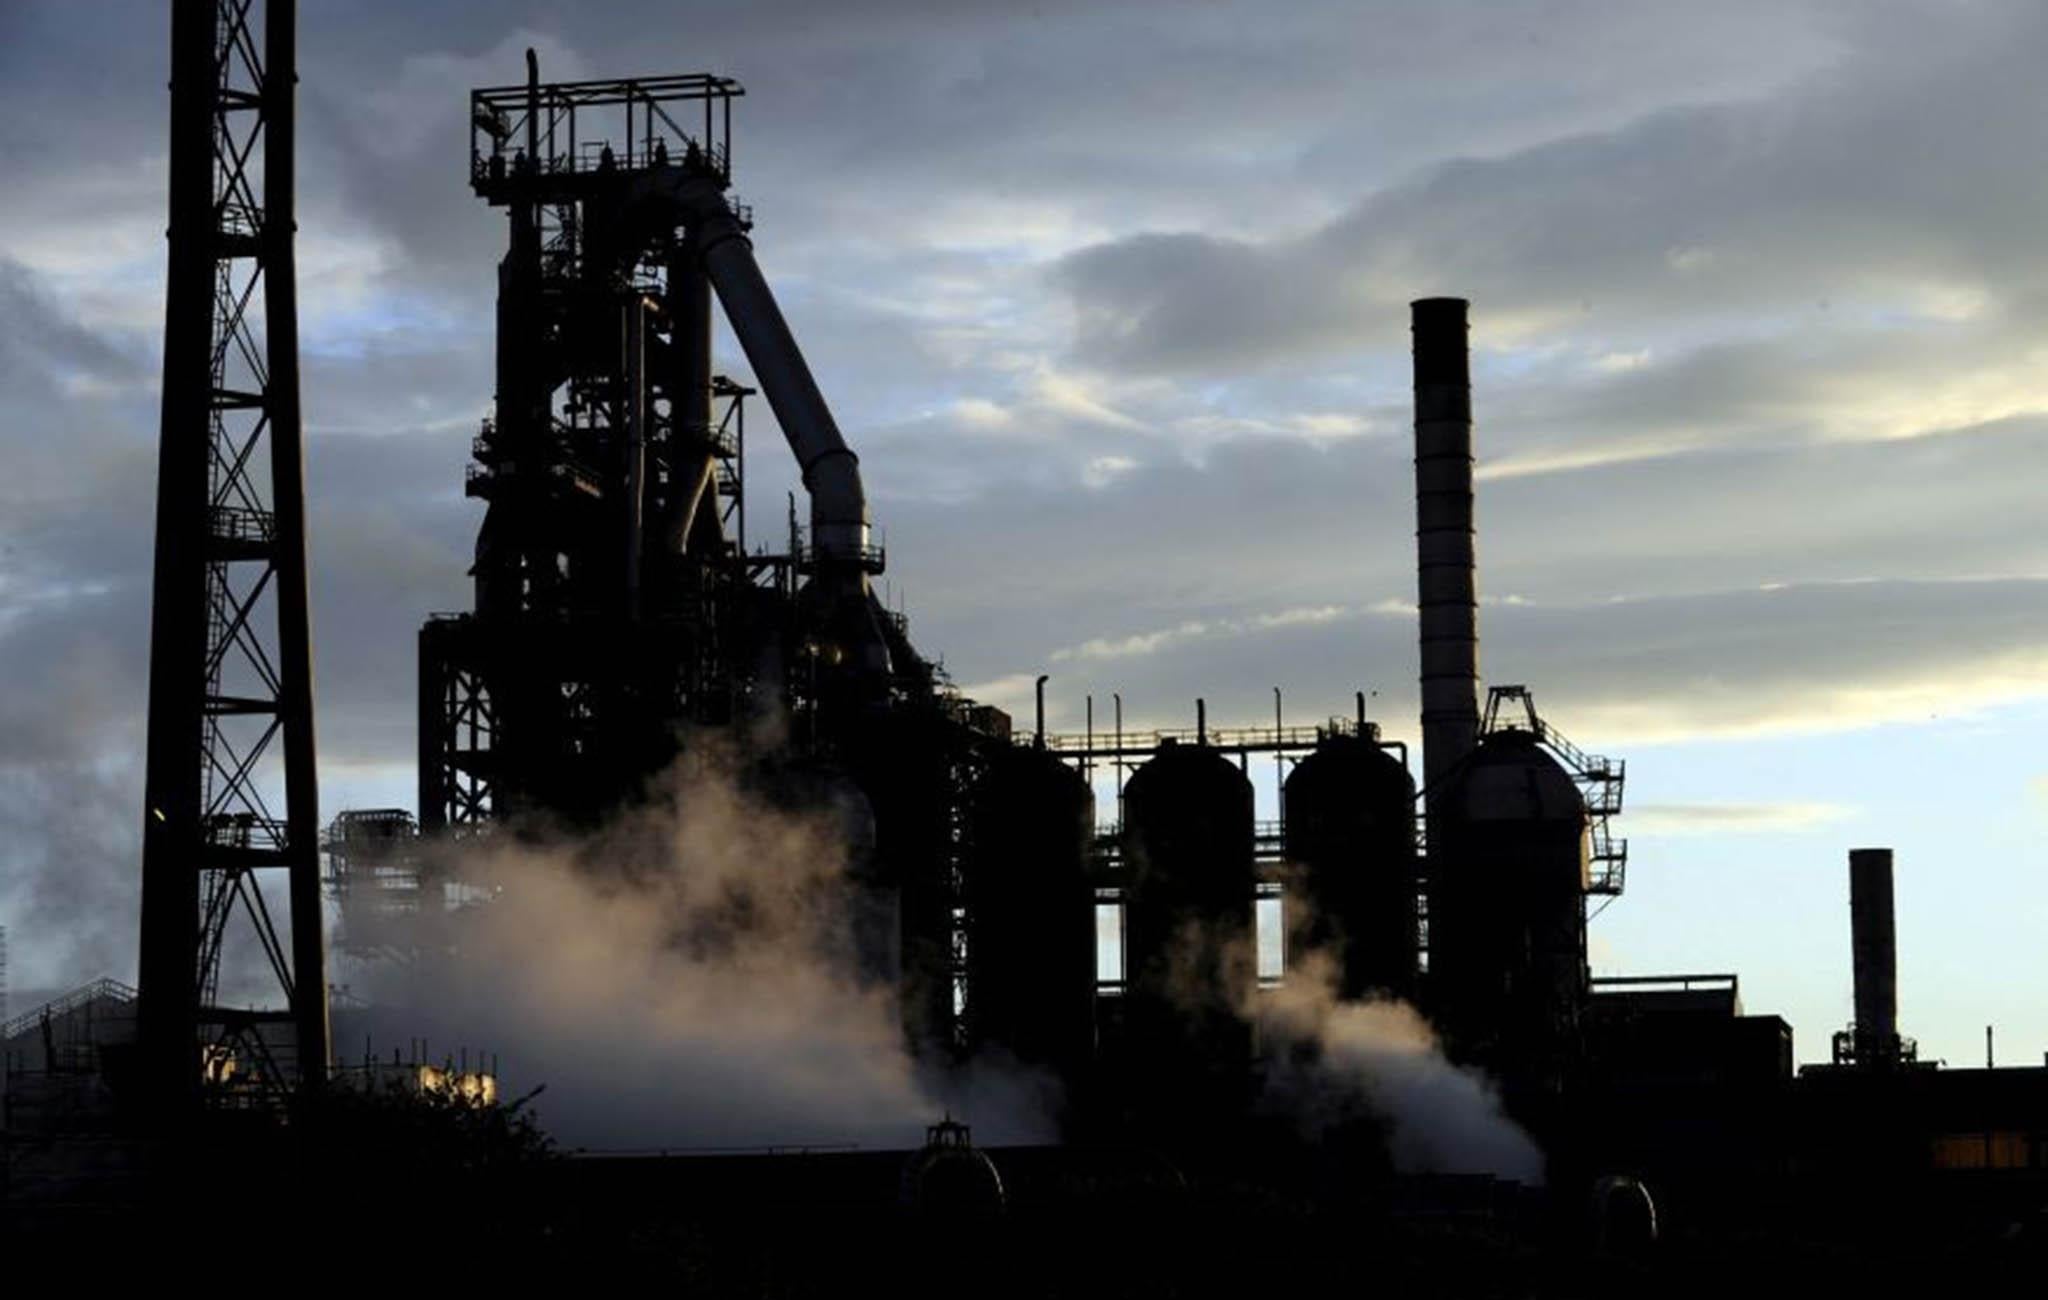 The Tata Steel plant in Port Talbot which may face closure if a buyer cannot be found